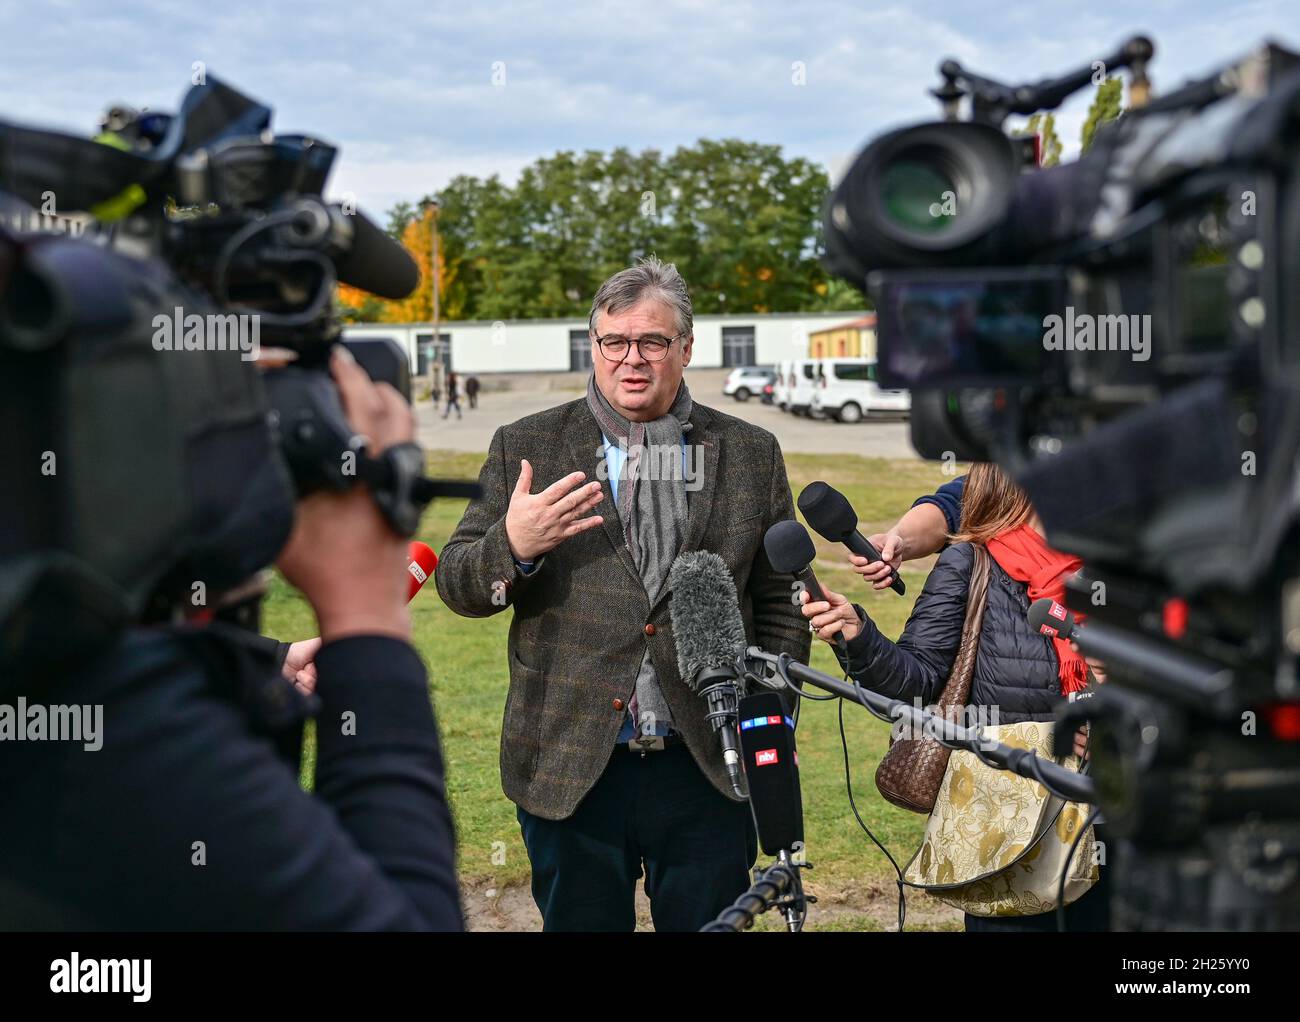 20 October 2021, Brandenburg, Eisenhüttenstadt: Olaf Jansen, head of Brandenburg's Central Foreigners Authority, speaks to media representatives at Brandenburg's Central Initial Reception Centre for Asylum Seekers (ZABH). In Brandenburg and Saxony, the reception facilities are filling up with people arriving in Germany from Iraq, Syria or Afghanistan via Belarus, Poland and the Baltic States. Photo: Patrick Pleul/dpa-Zentralbild/ZB Stock Photo